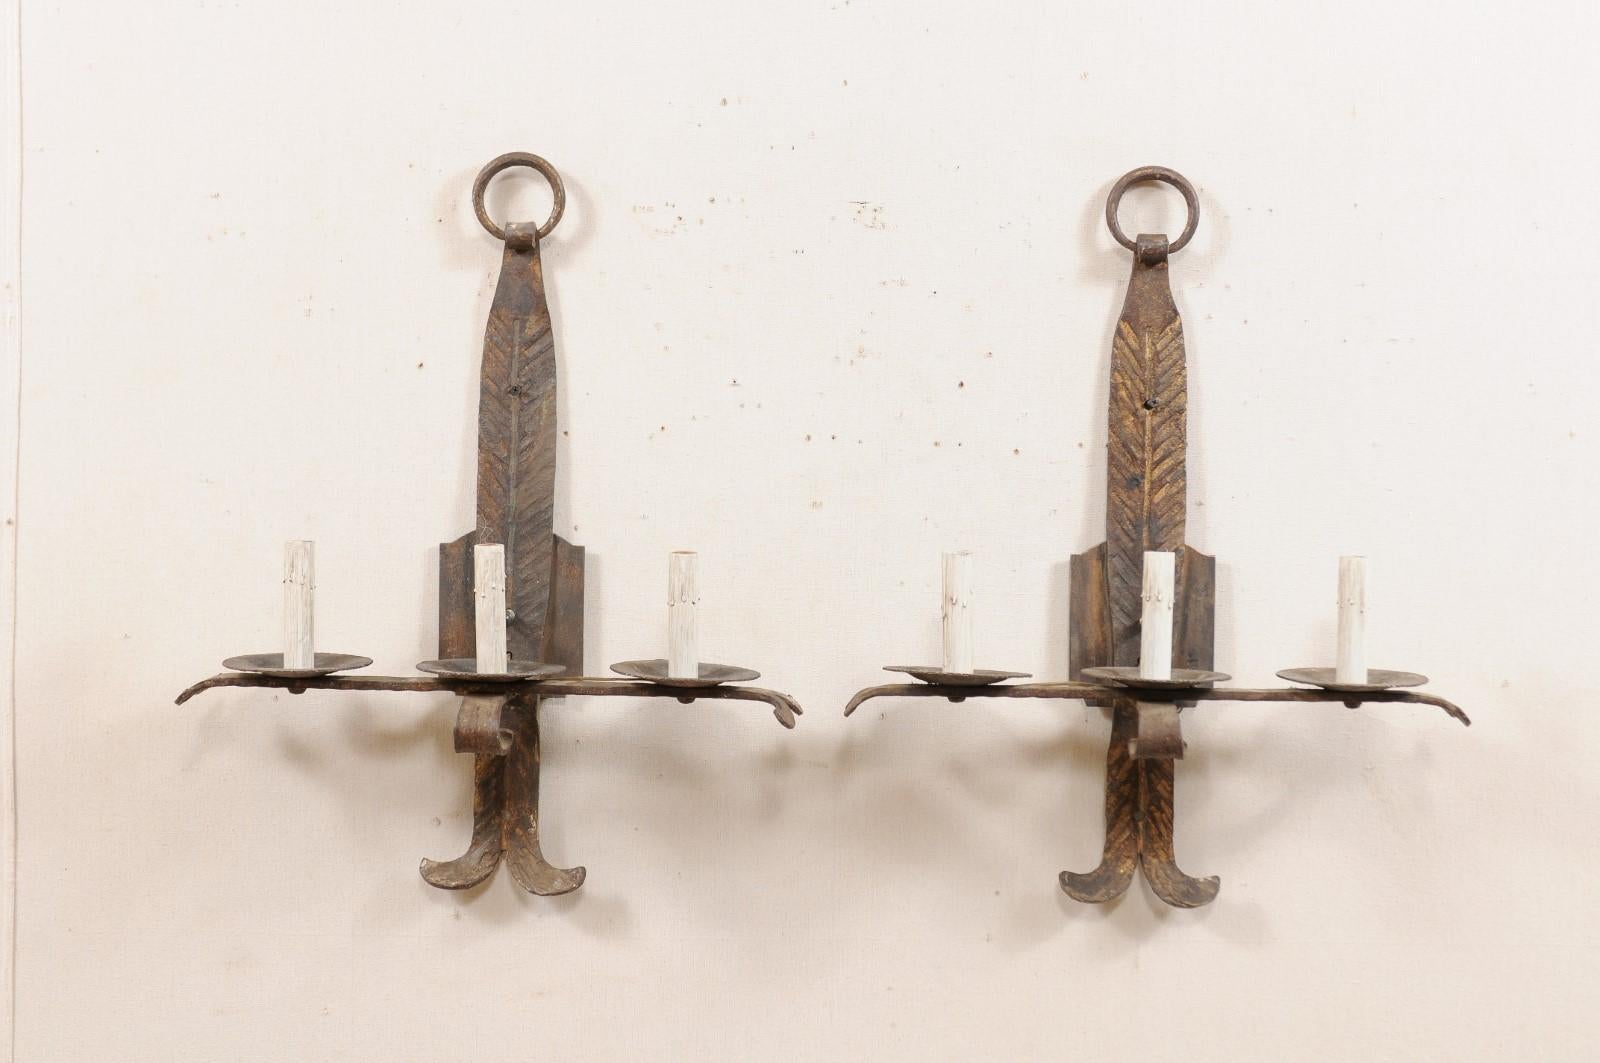 A pair of French three-light forged-iron sconces from the mid-20th century. These vintage hand forged sconces from France each feature a horizontally placed bar, with splayed tips, which provide support to the three iron bobeches with painted candle